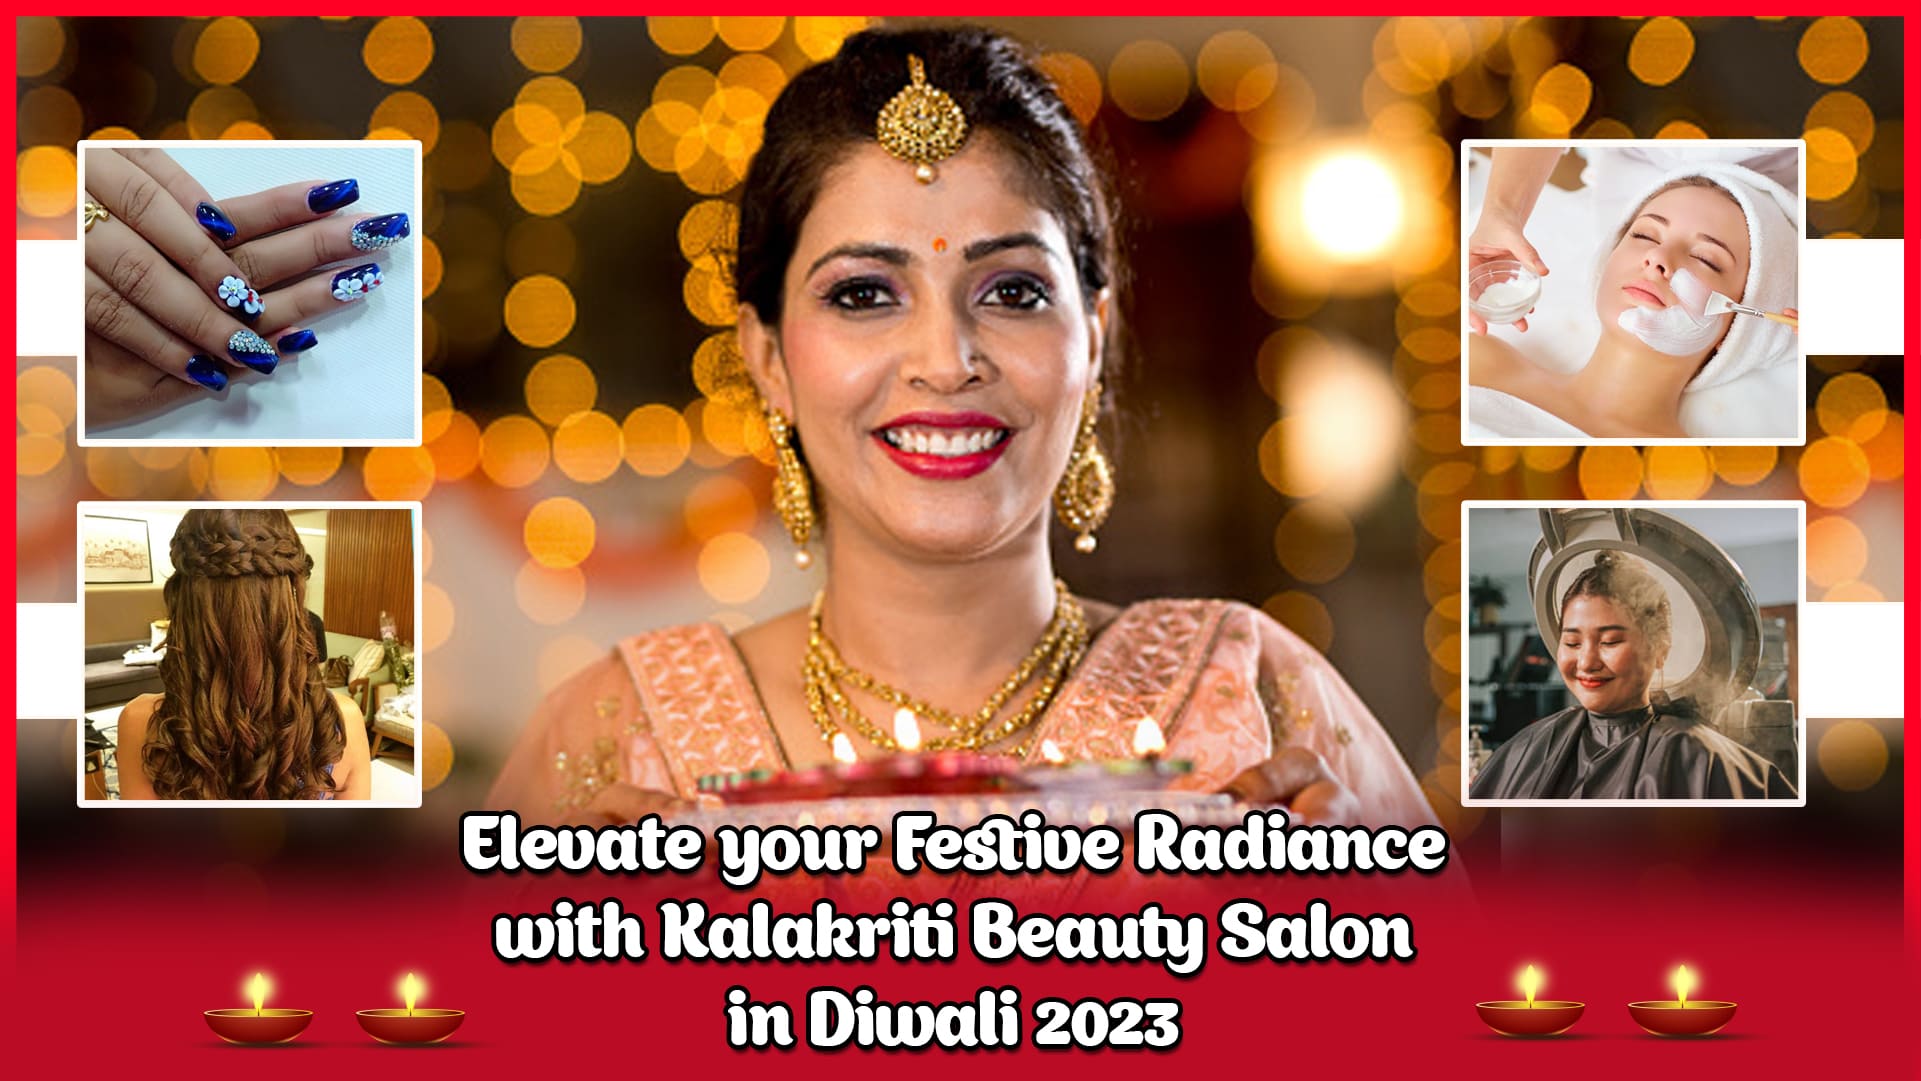 Elevate your festive radiance with Kalakriti beauty salon in Diwali 2023